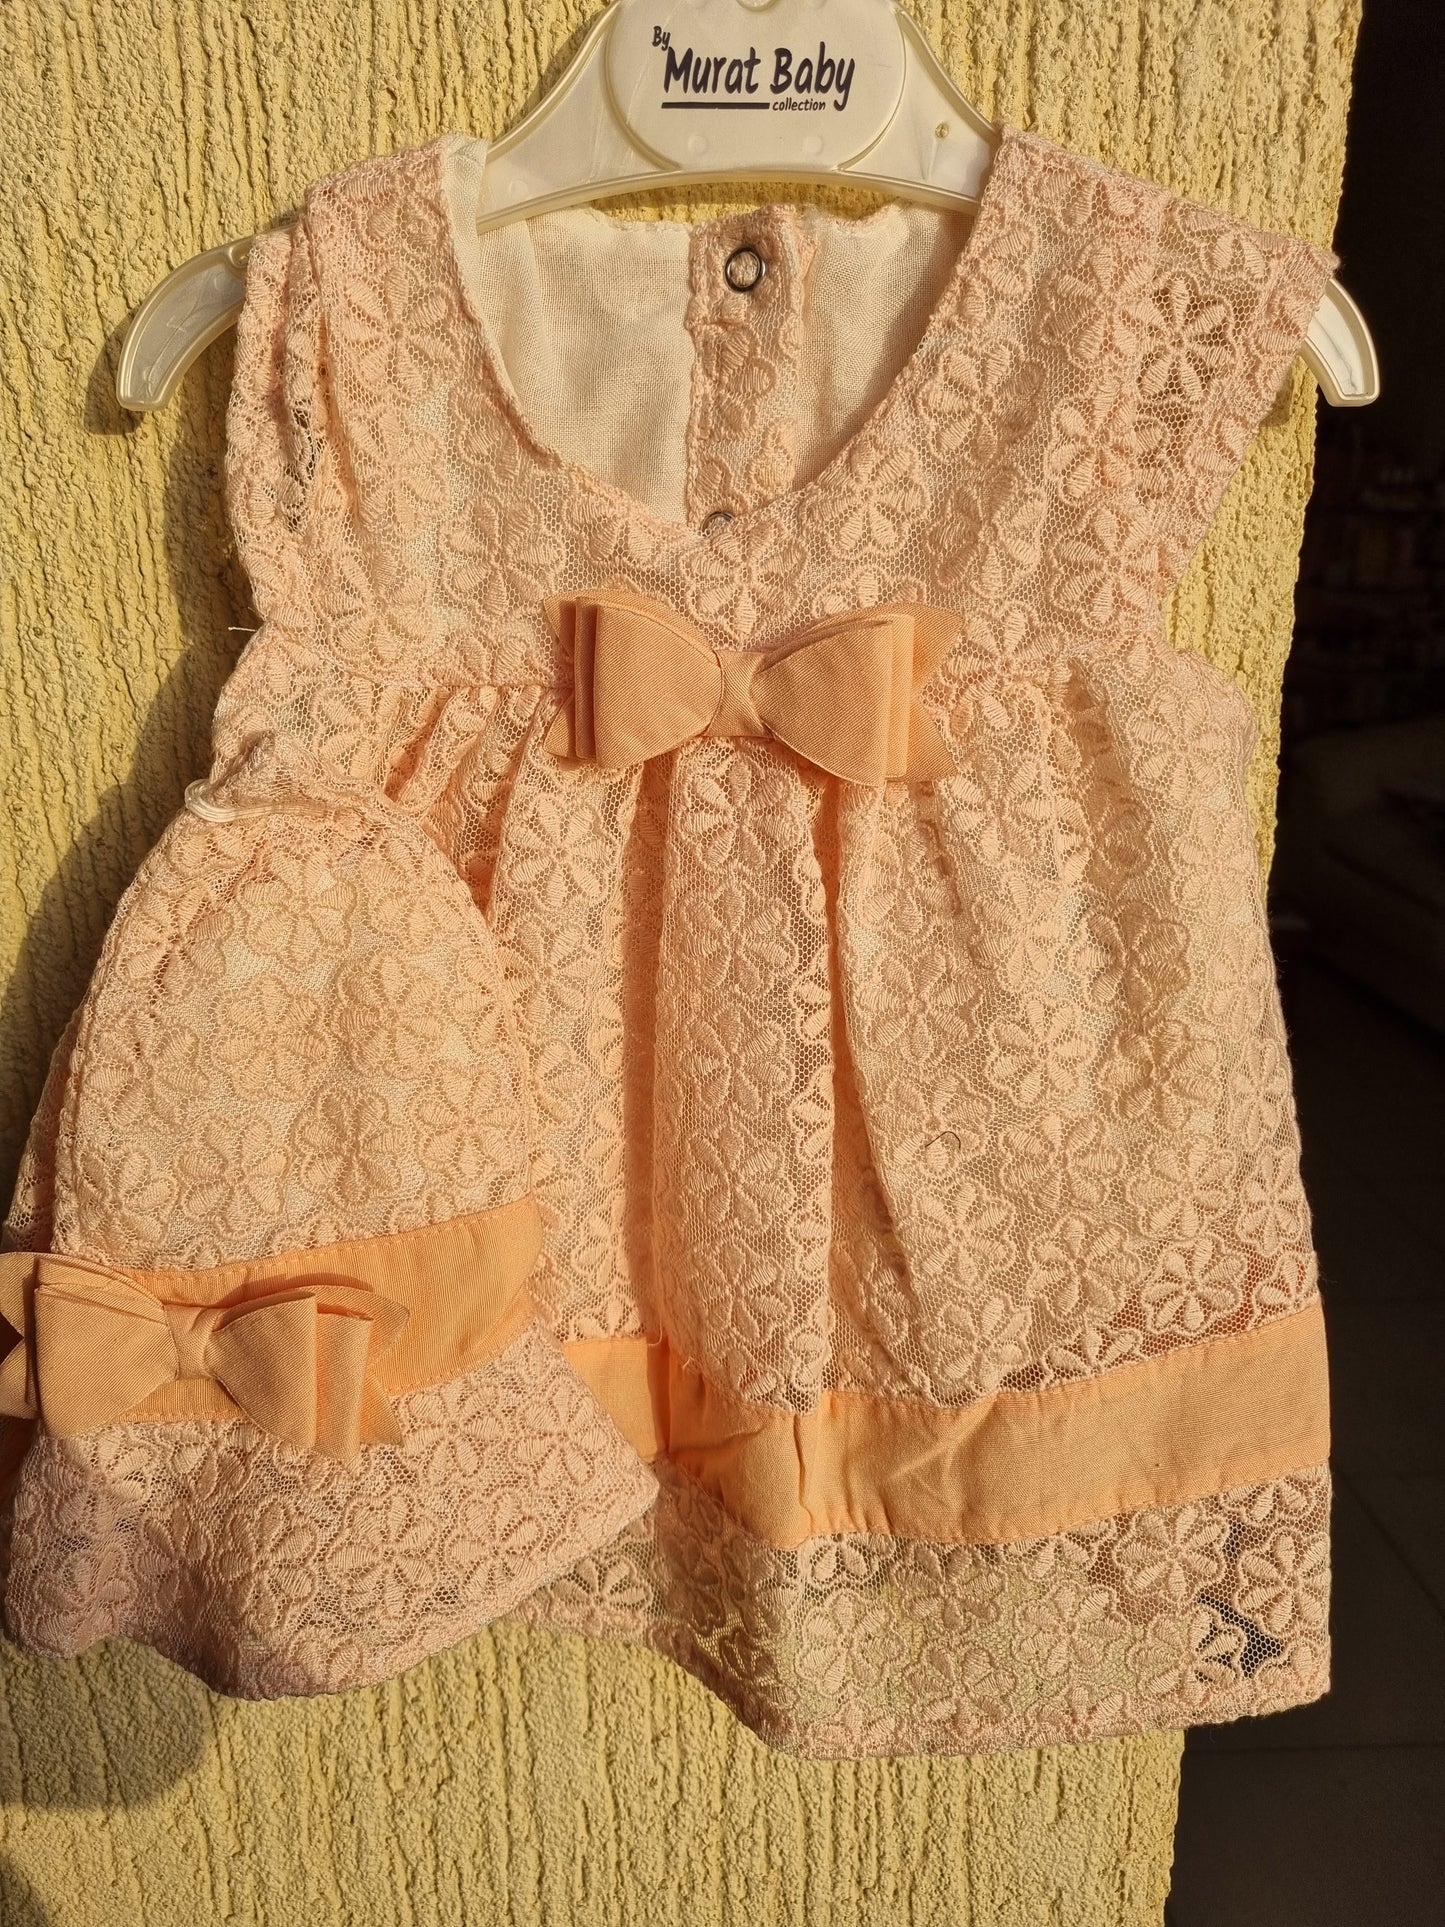 Baby dress with hat